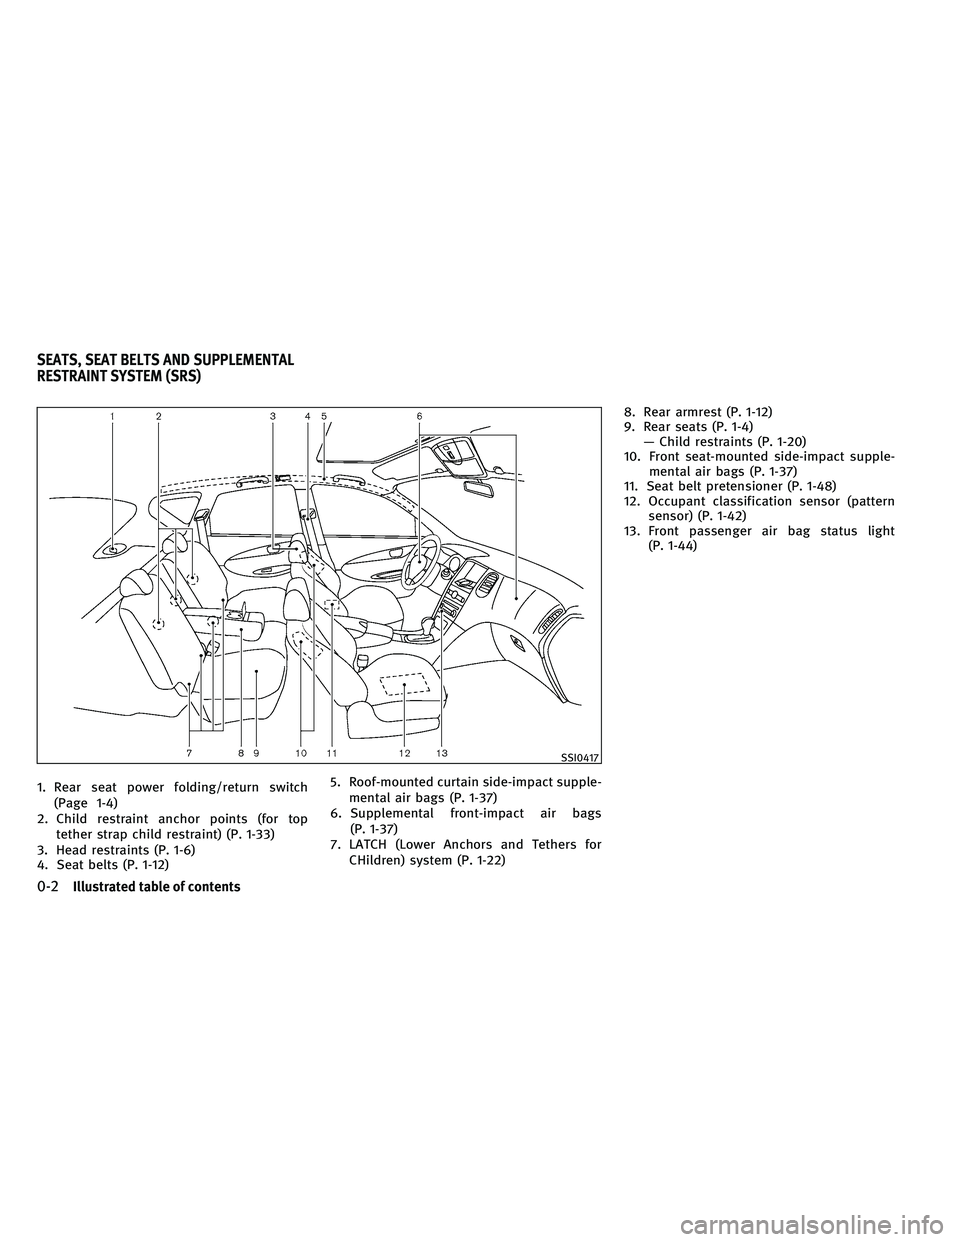 INFINITI EX 2011  Owners Manual 1. Rear seat power folding/return switch(Page 1-4)
2. Child restraint anchor points (for top tether strap child restraint) (P. 1-33)
3. Head restraints (P. 1-6)
4. Seat belts (P. 1-12) 5. Roof-mounted